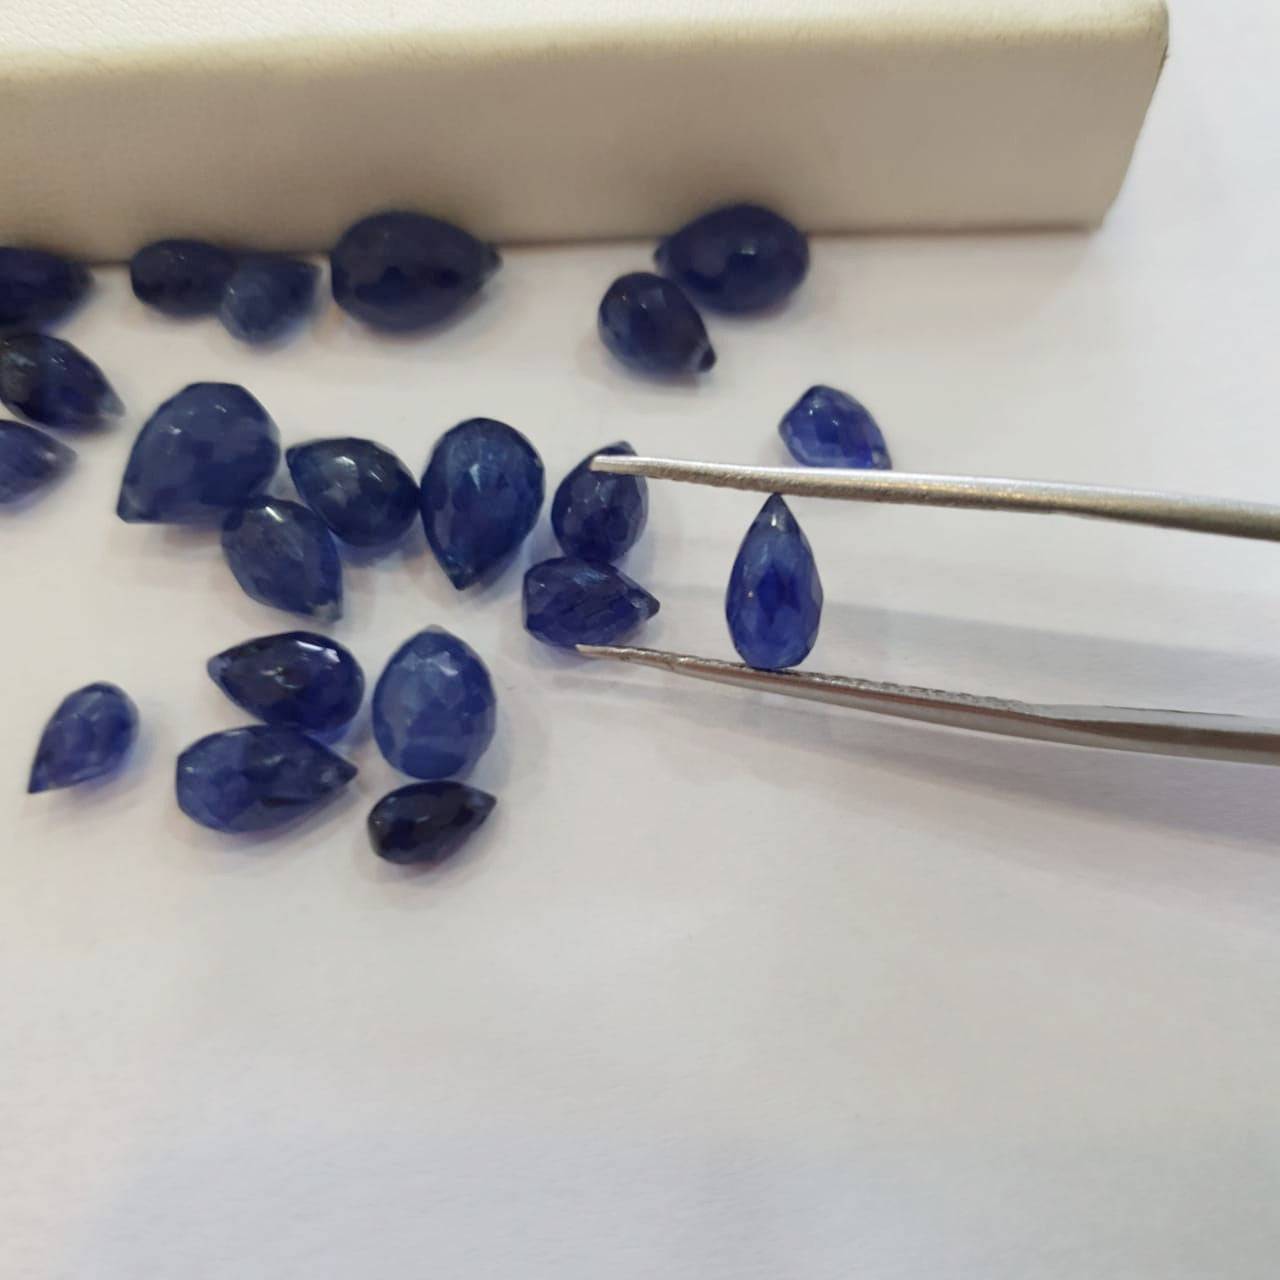 12 Pcs Sapphires Drops Faceted Top Drilled - The LabradoriteKing